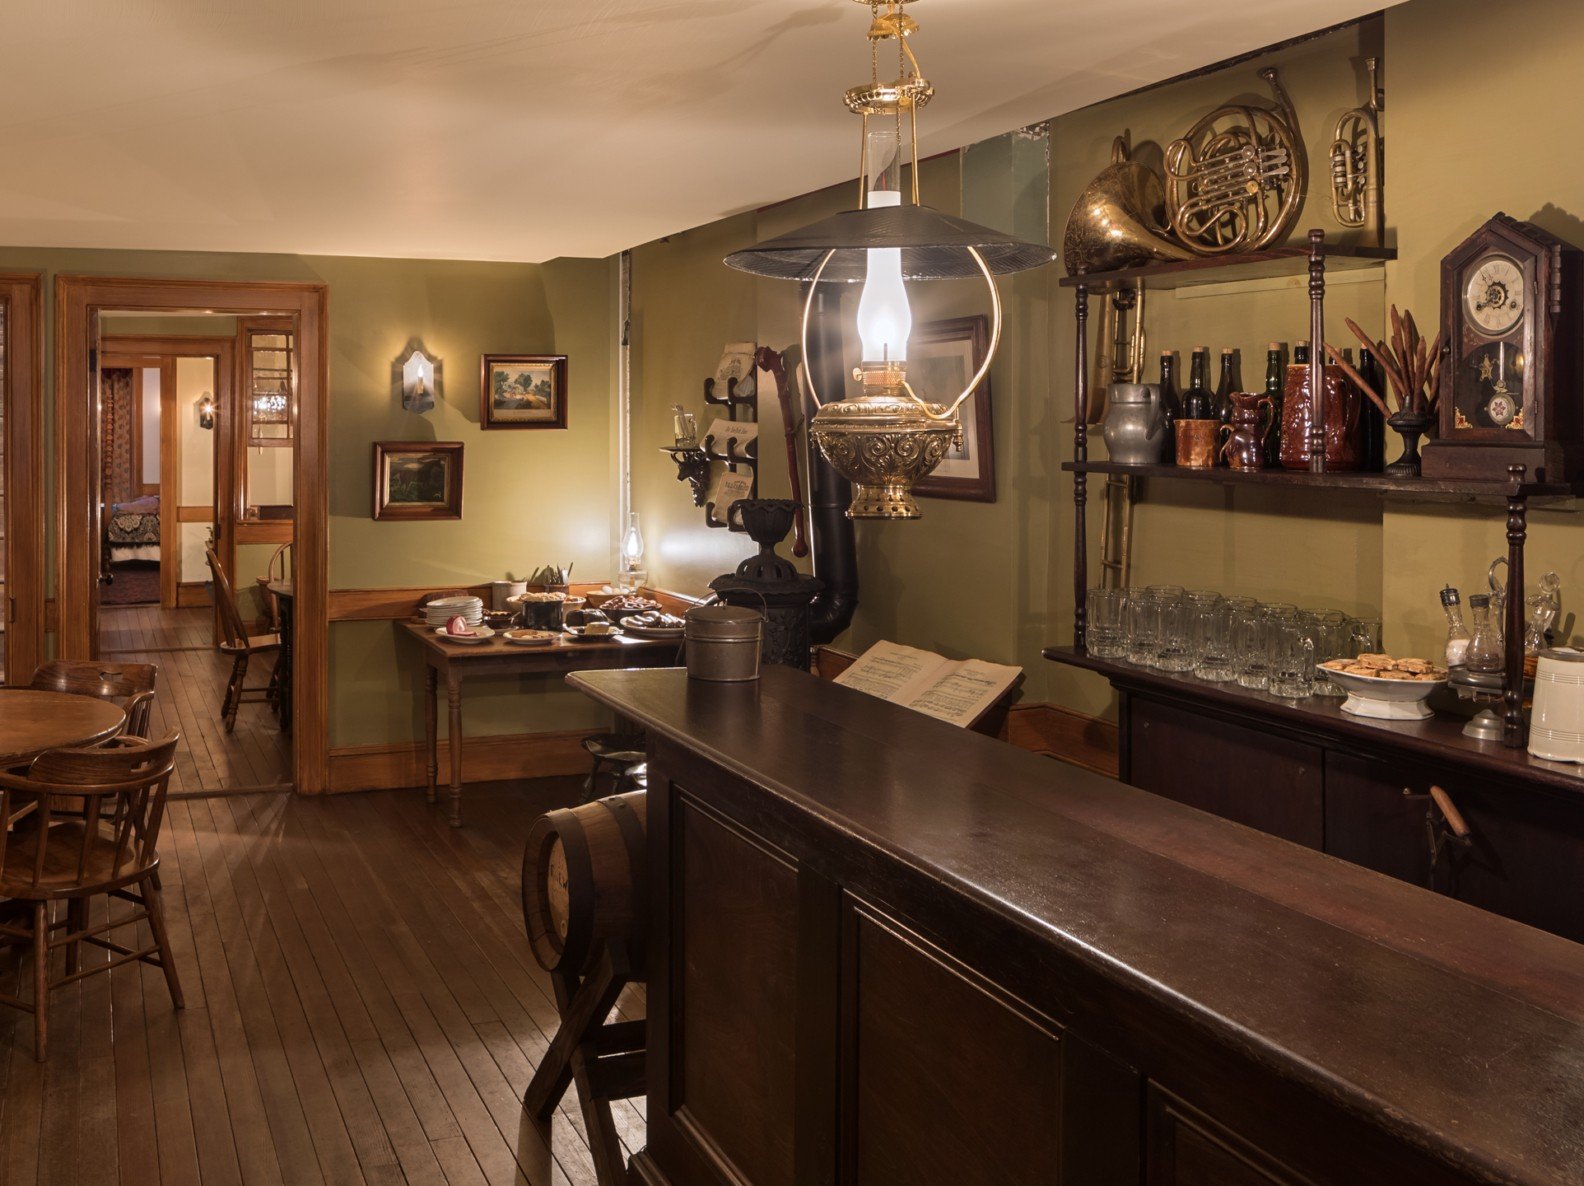 John and Caroline Schneider’s basement lager beer saloon has been recreated for the Shop Life tour.